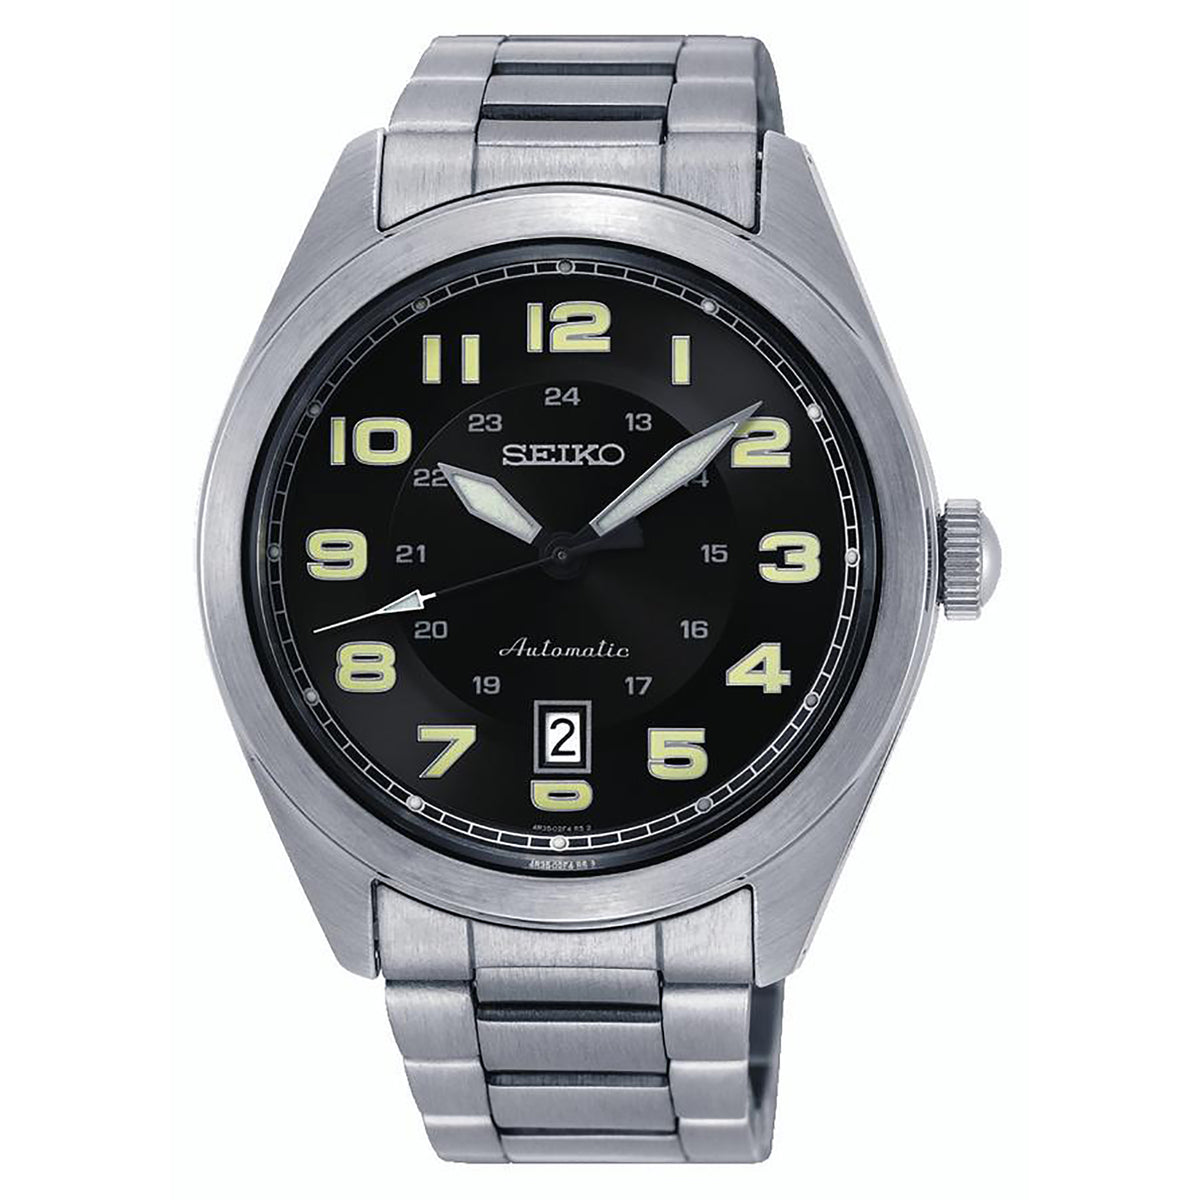 SEIKO Men's Conceptual Series Formal Automatic Watch – The Watch House